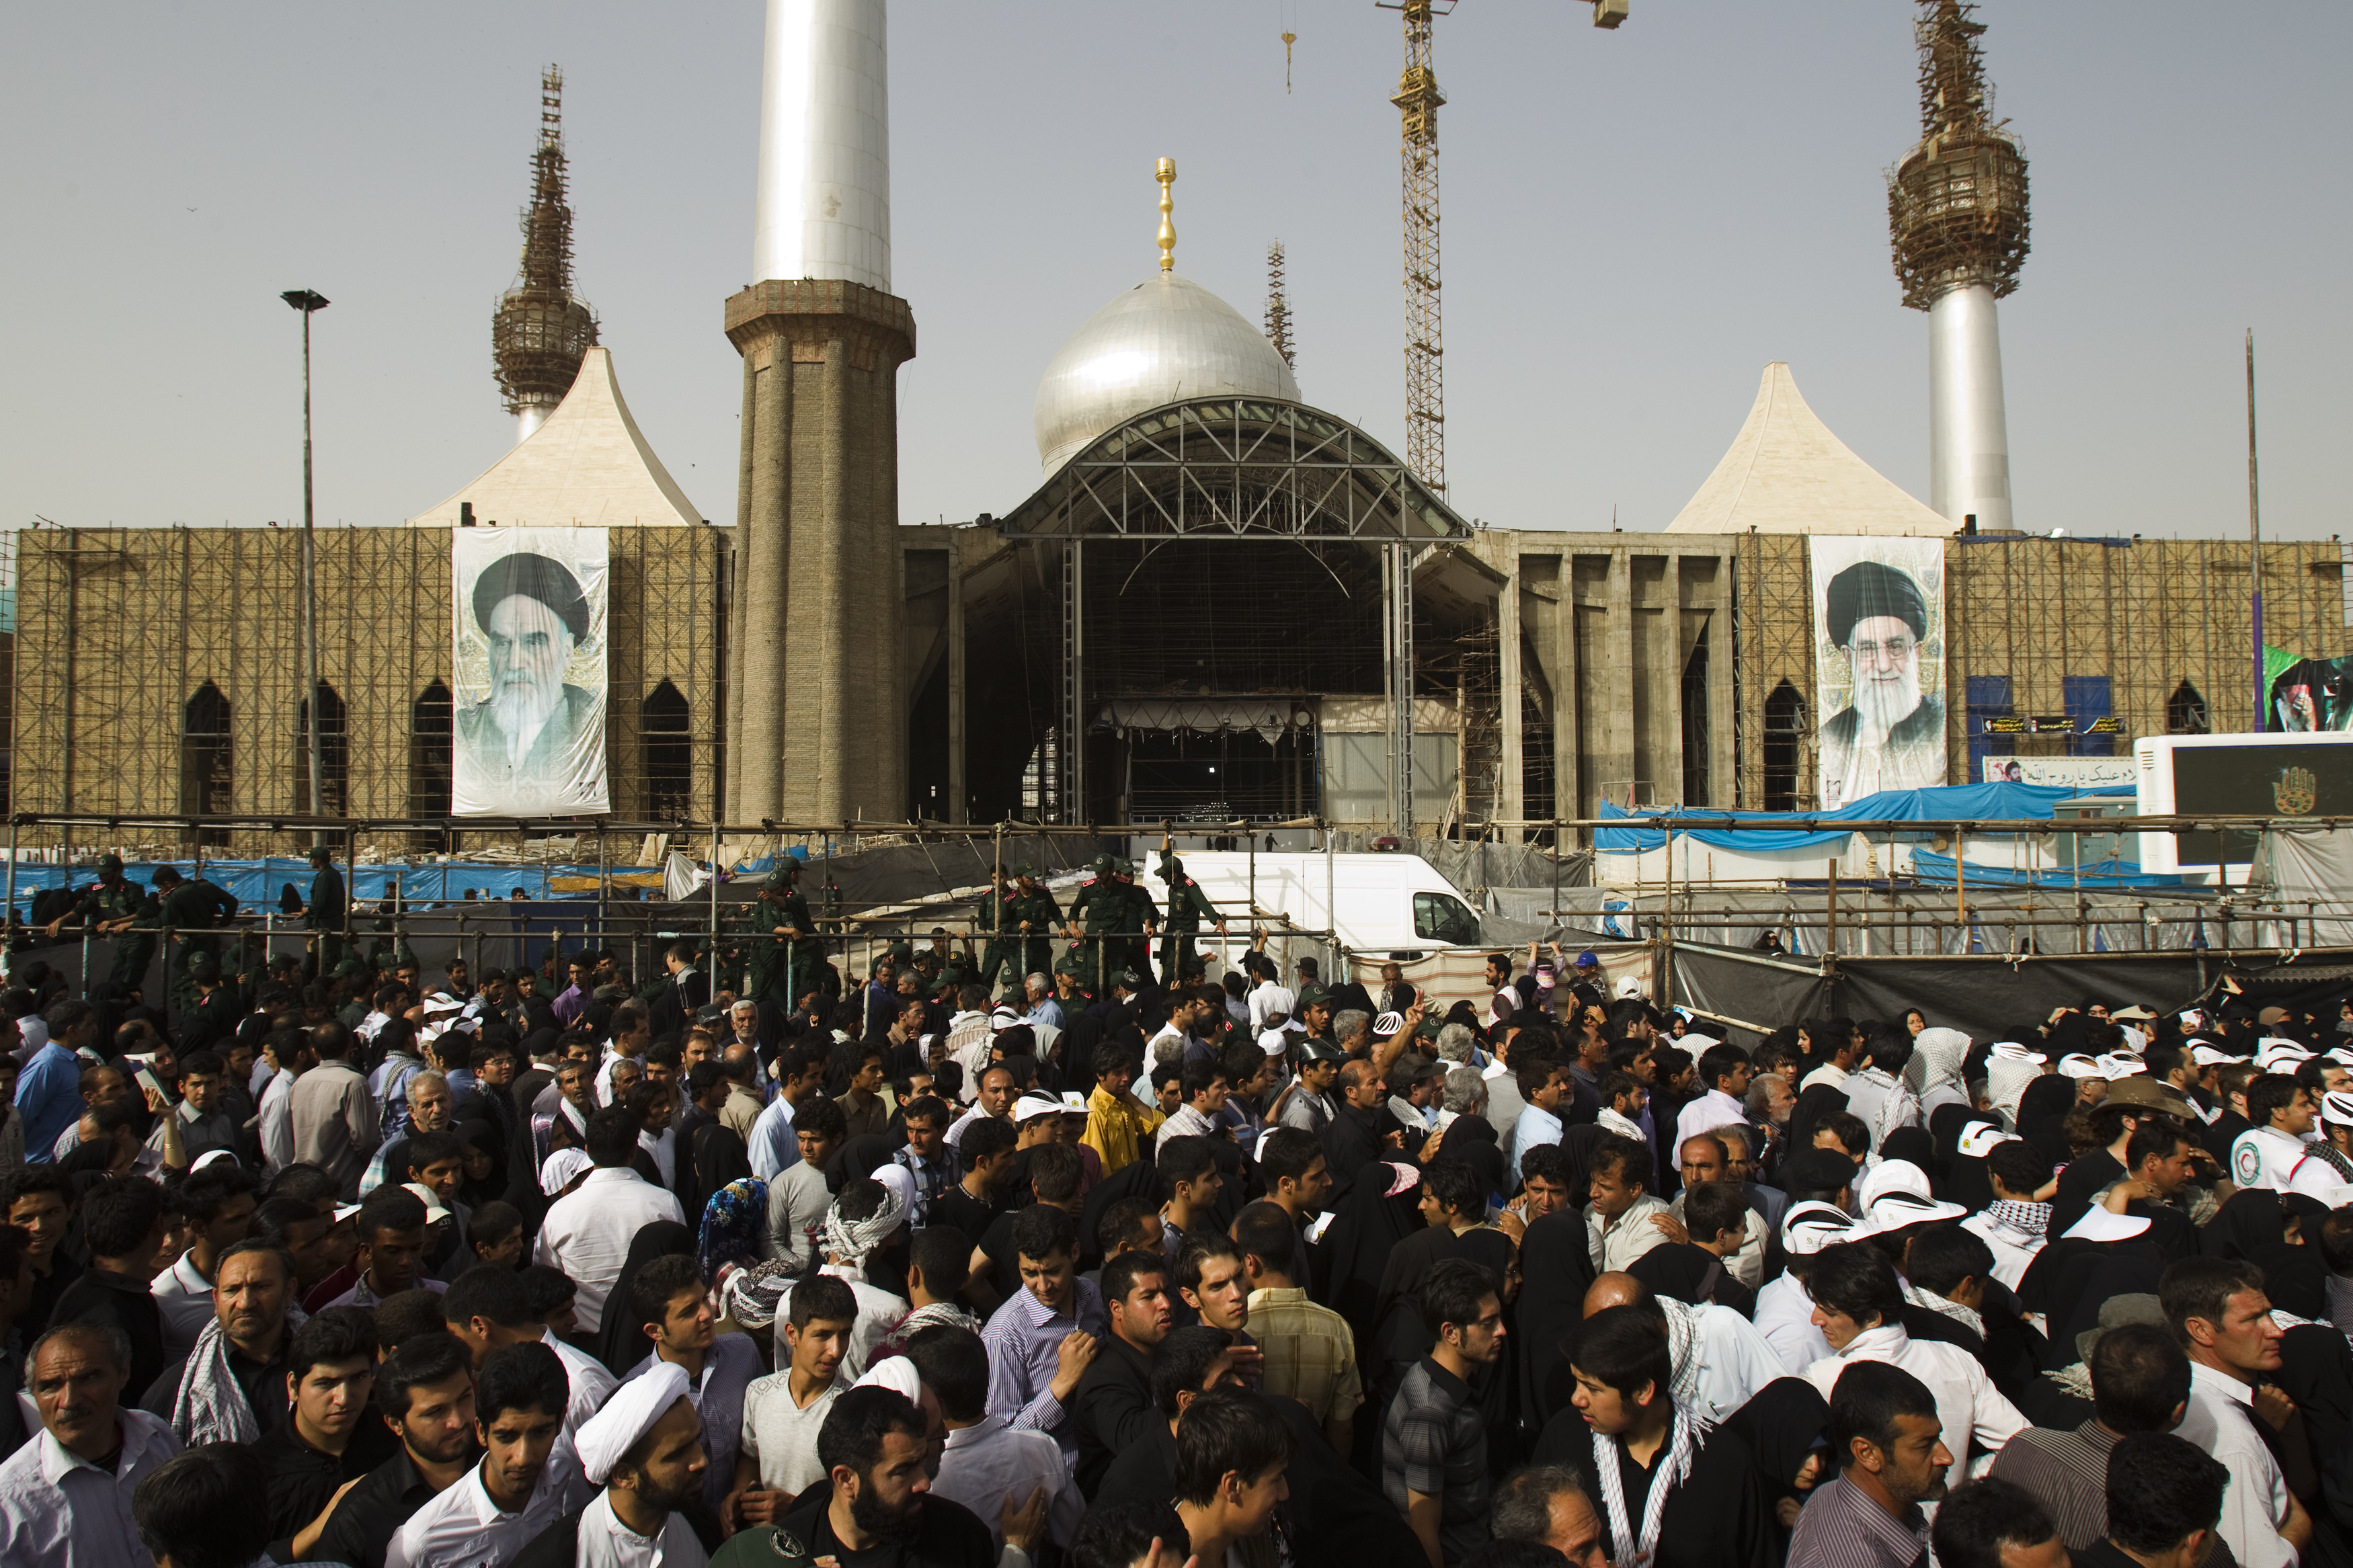 EDITORS' NOTE: Reuters and other foreign media are subject to Iranian restrictions on their ability to film or take pictures in Tehran. A general view of Iran's late leader Ayatollah Ruhollah Khomeini's shrine with pictures of him (L) and Iran's Supreme Leader Ayatollah Ali Khamenei in the Behesht Zahra cemetery, south of Tehran June 4, 2011. REUTERS/Raheb Homavandi (IRAN - Tags: ANNIVERSARY POLITICS)